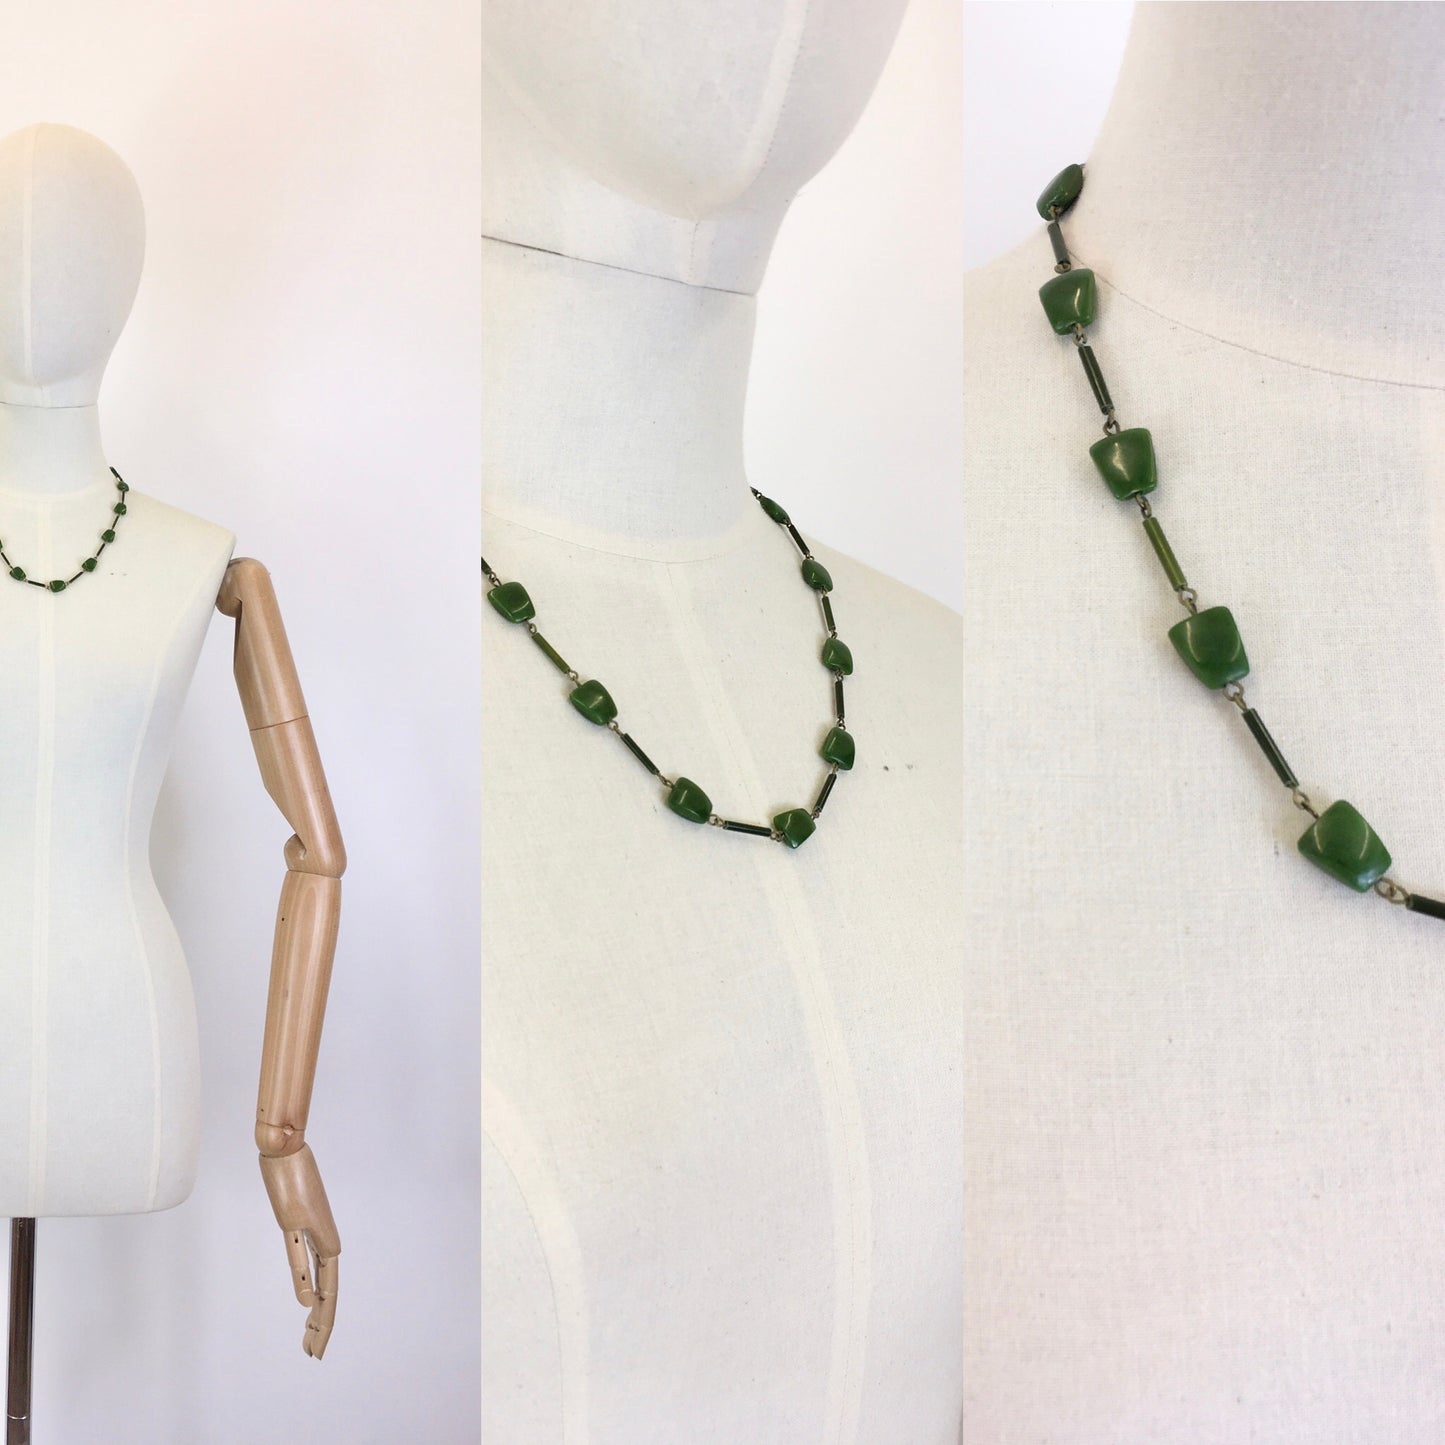 Original 1930’s Glass Beaded Necklace - In A Dark Forest Green